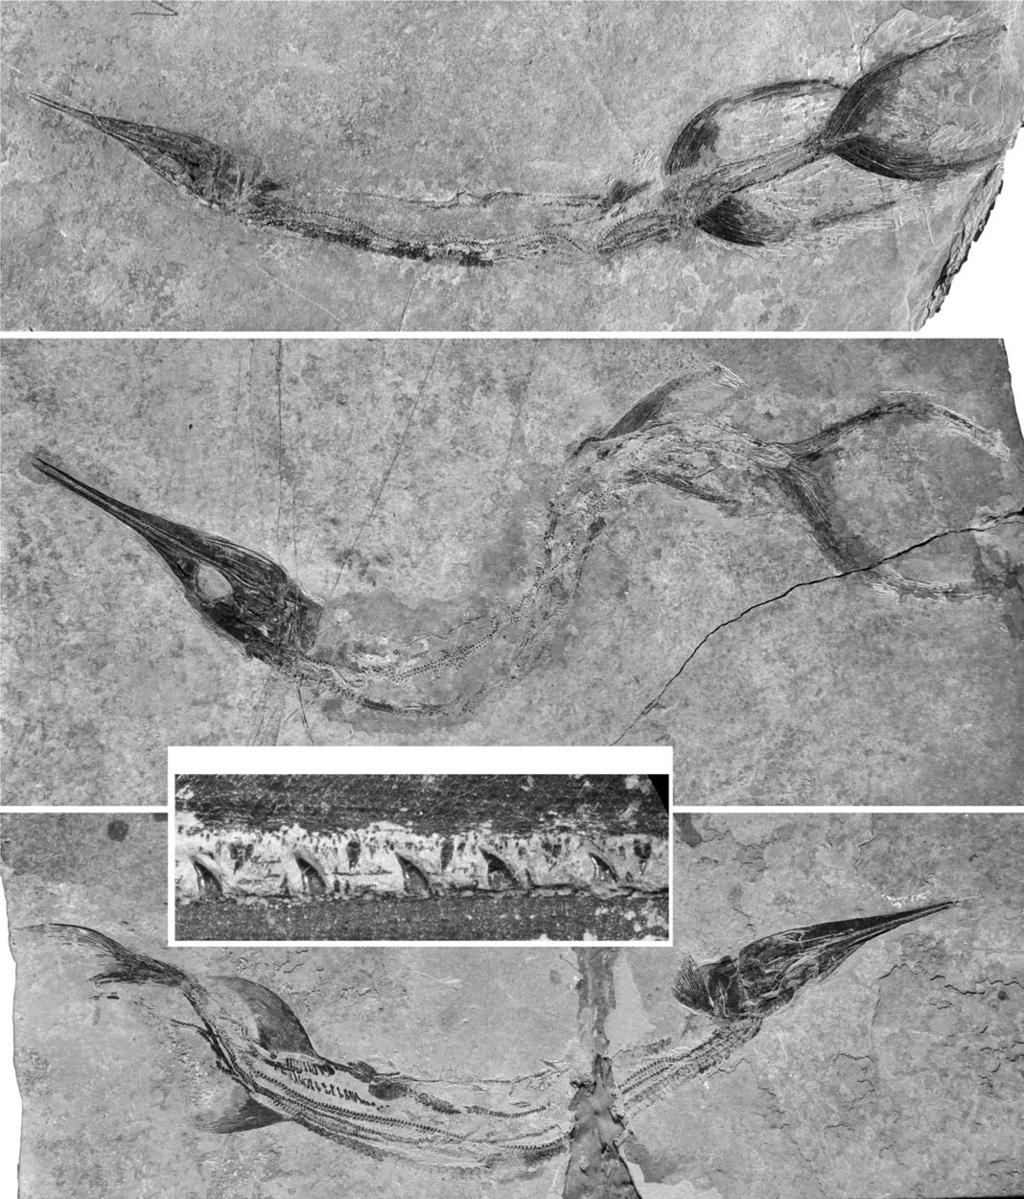 596 ACTA PALAEONTOLOGICA POLONICA 56 (3), 2011 Fig. 10. Photographs of saurichthyid fish Sinosaurichthys longimedialis gen. et sp. nov. from Middle Triassic of Dawazi Section, Luoping, Yunnan, China.